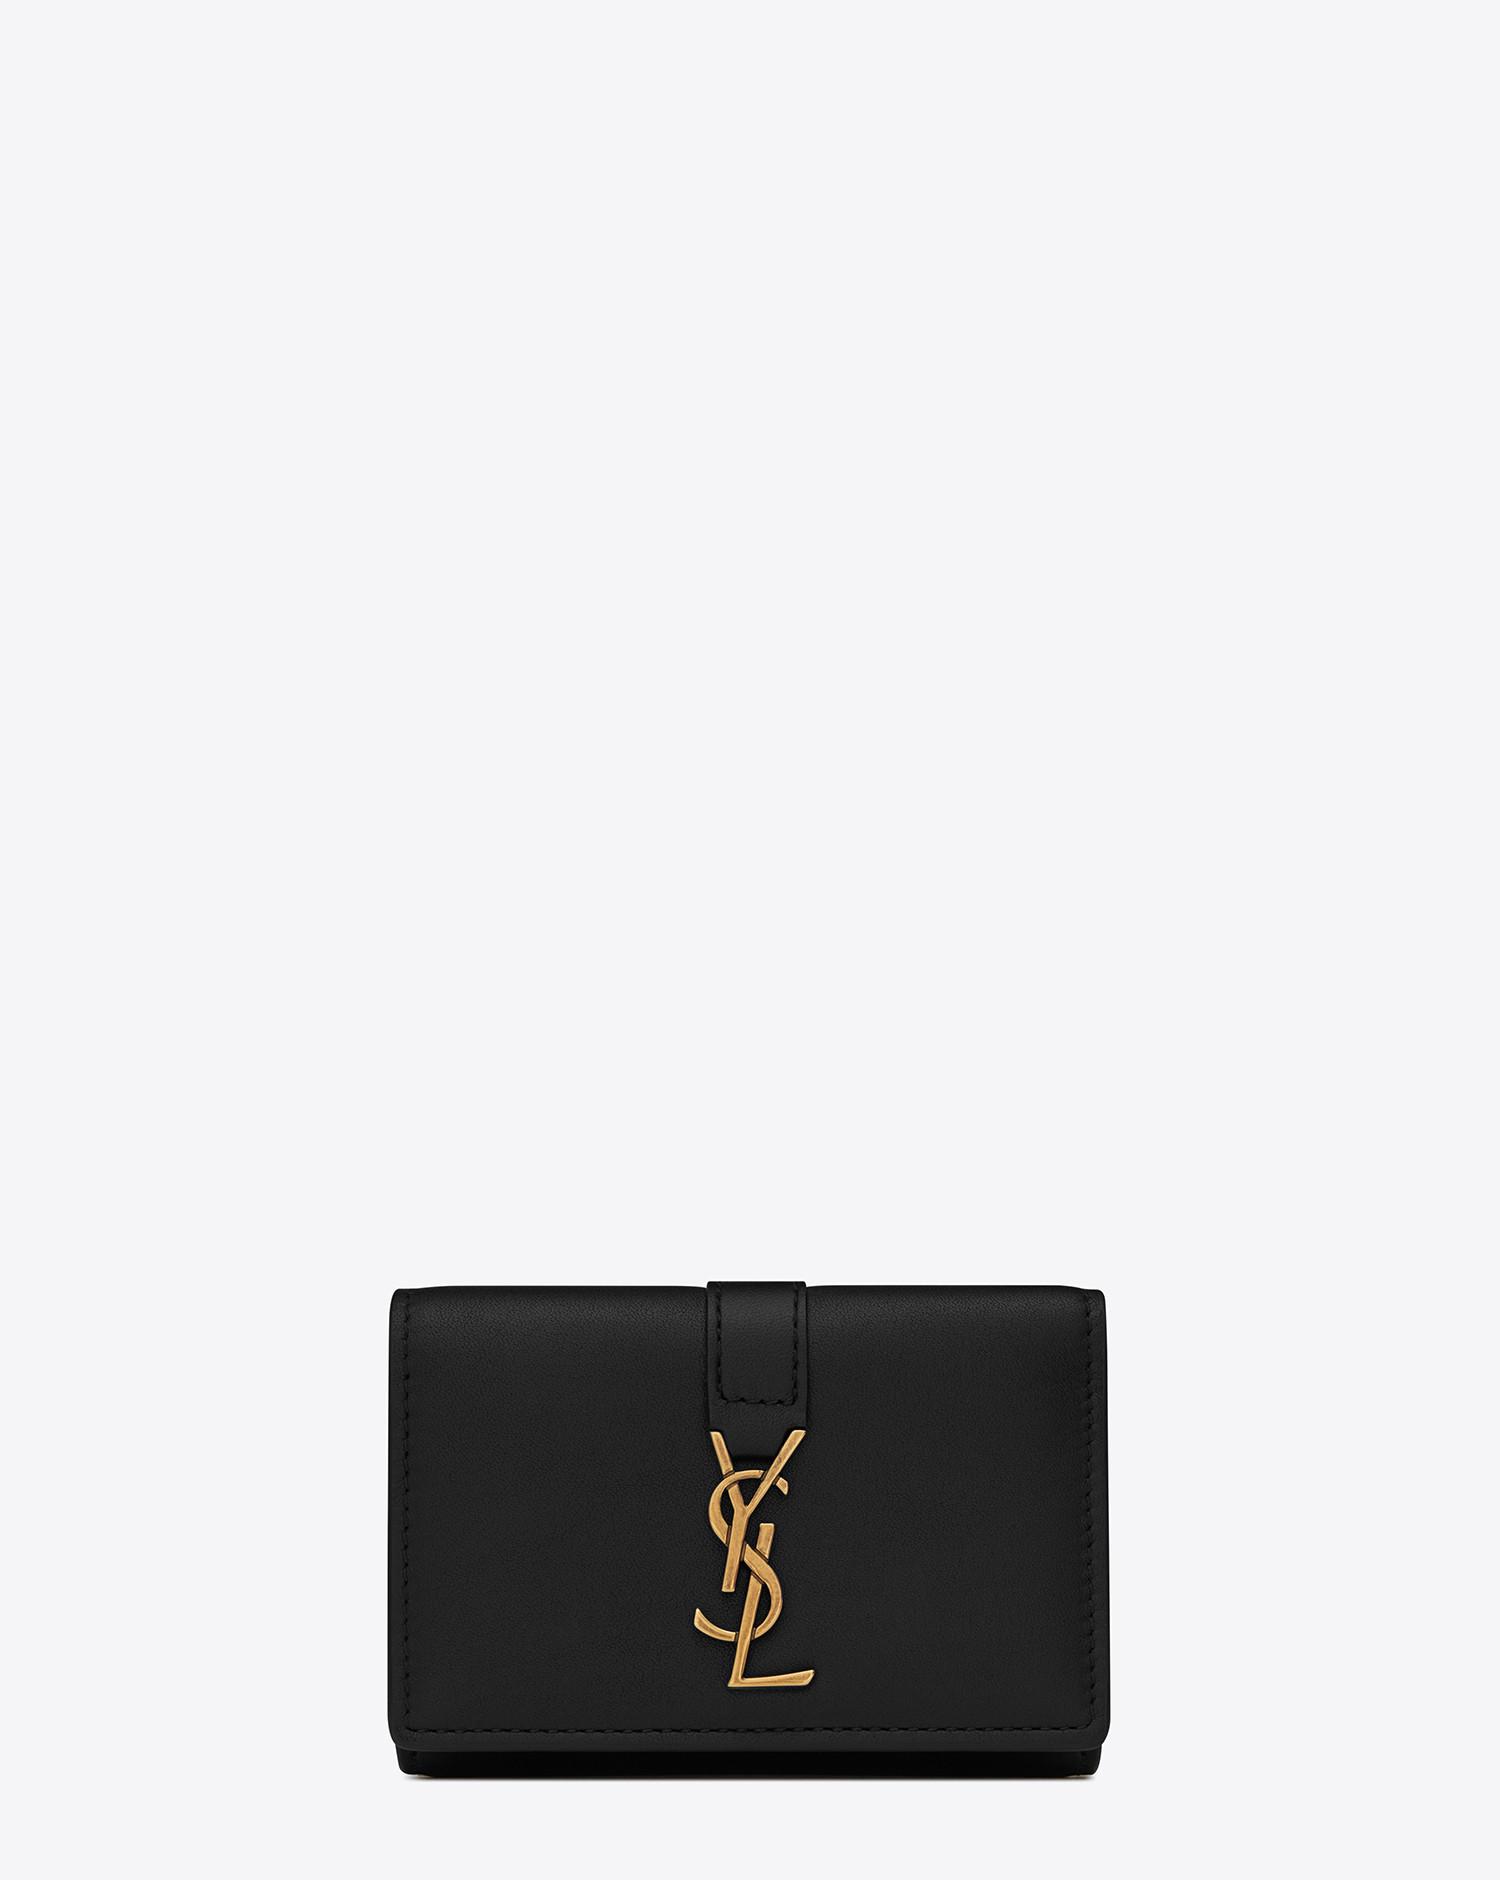 Saint Laurent Ysl Line Key Pouch In Smooth Leather in Black